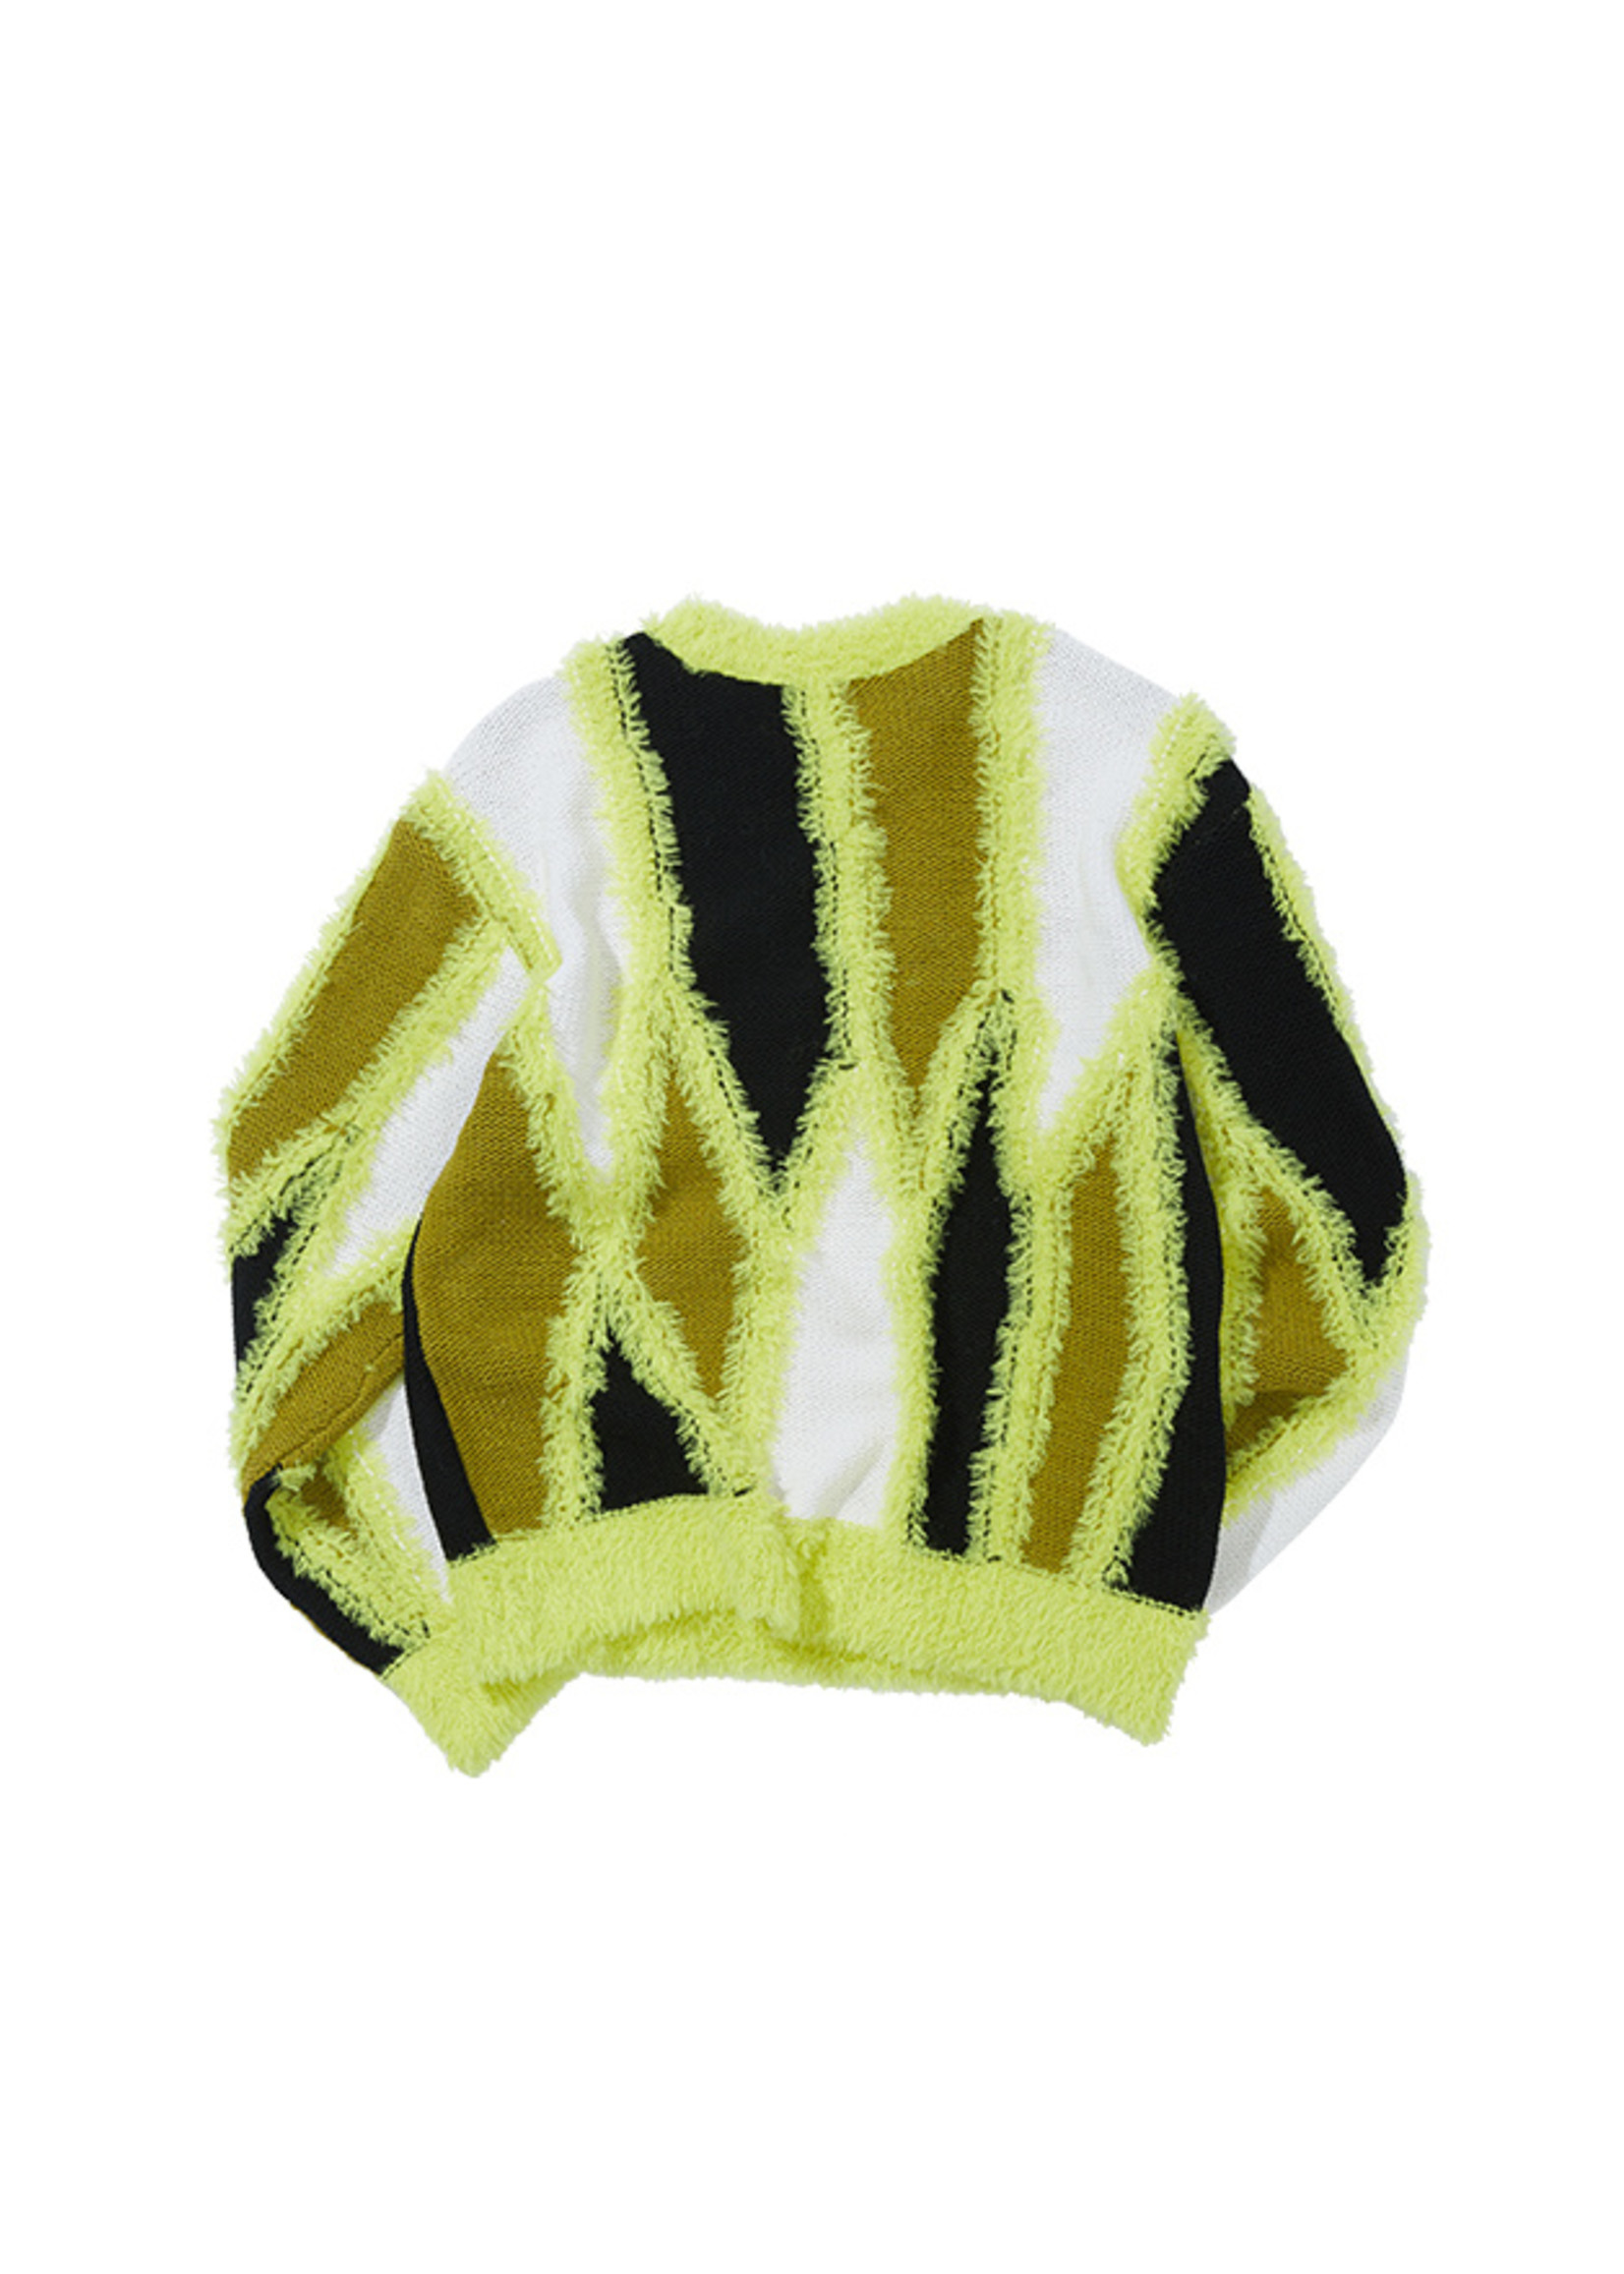 ANDERSSON BELL Unisex Neon Green Intarsia Sweater